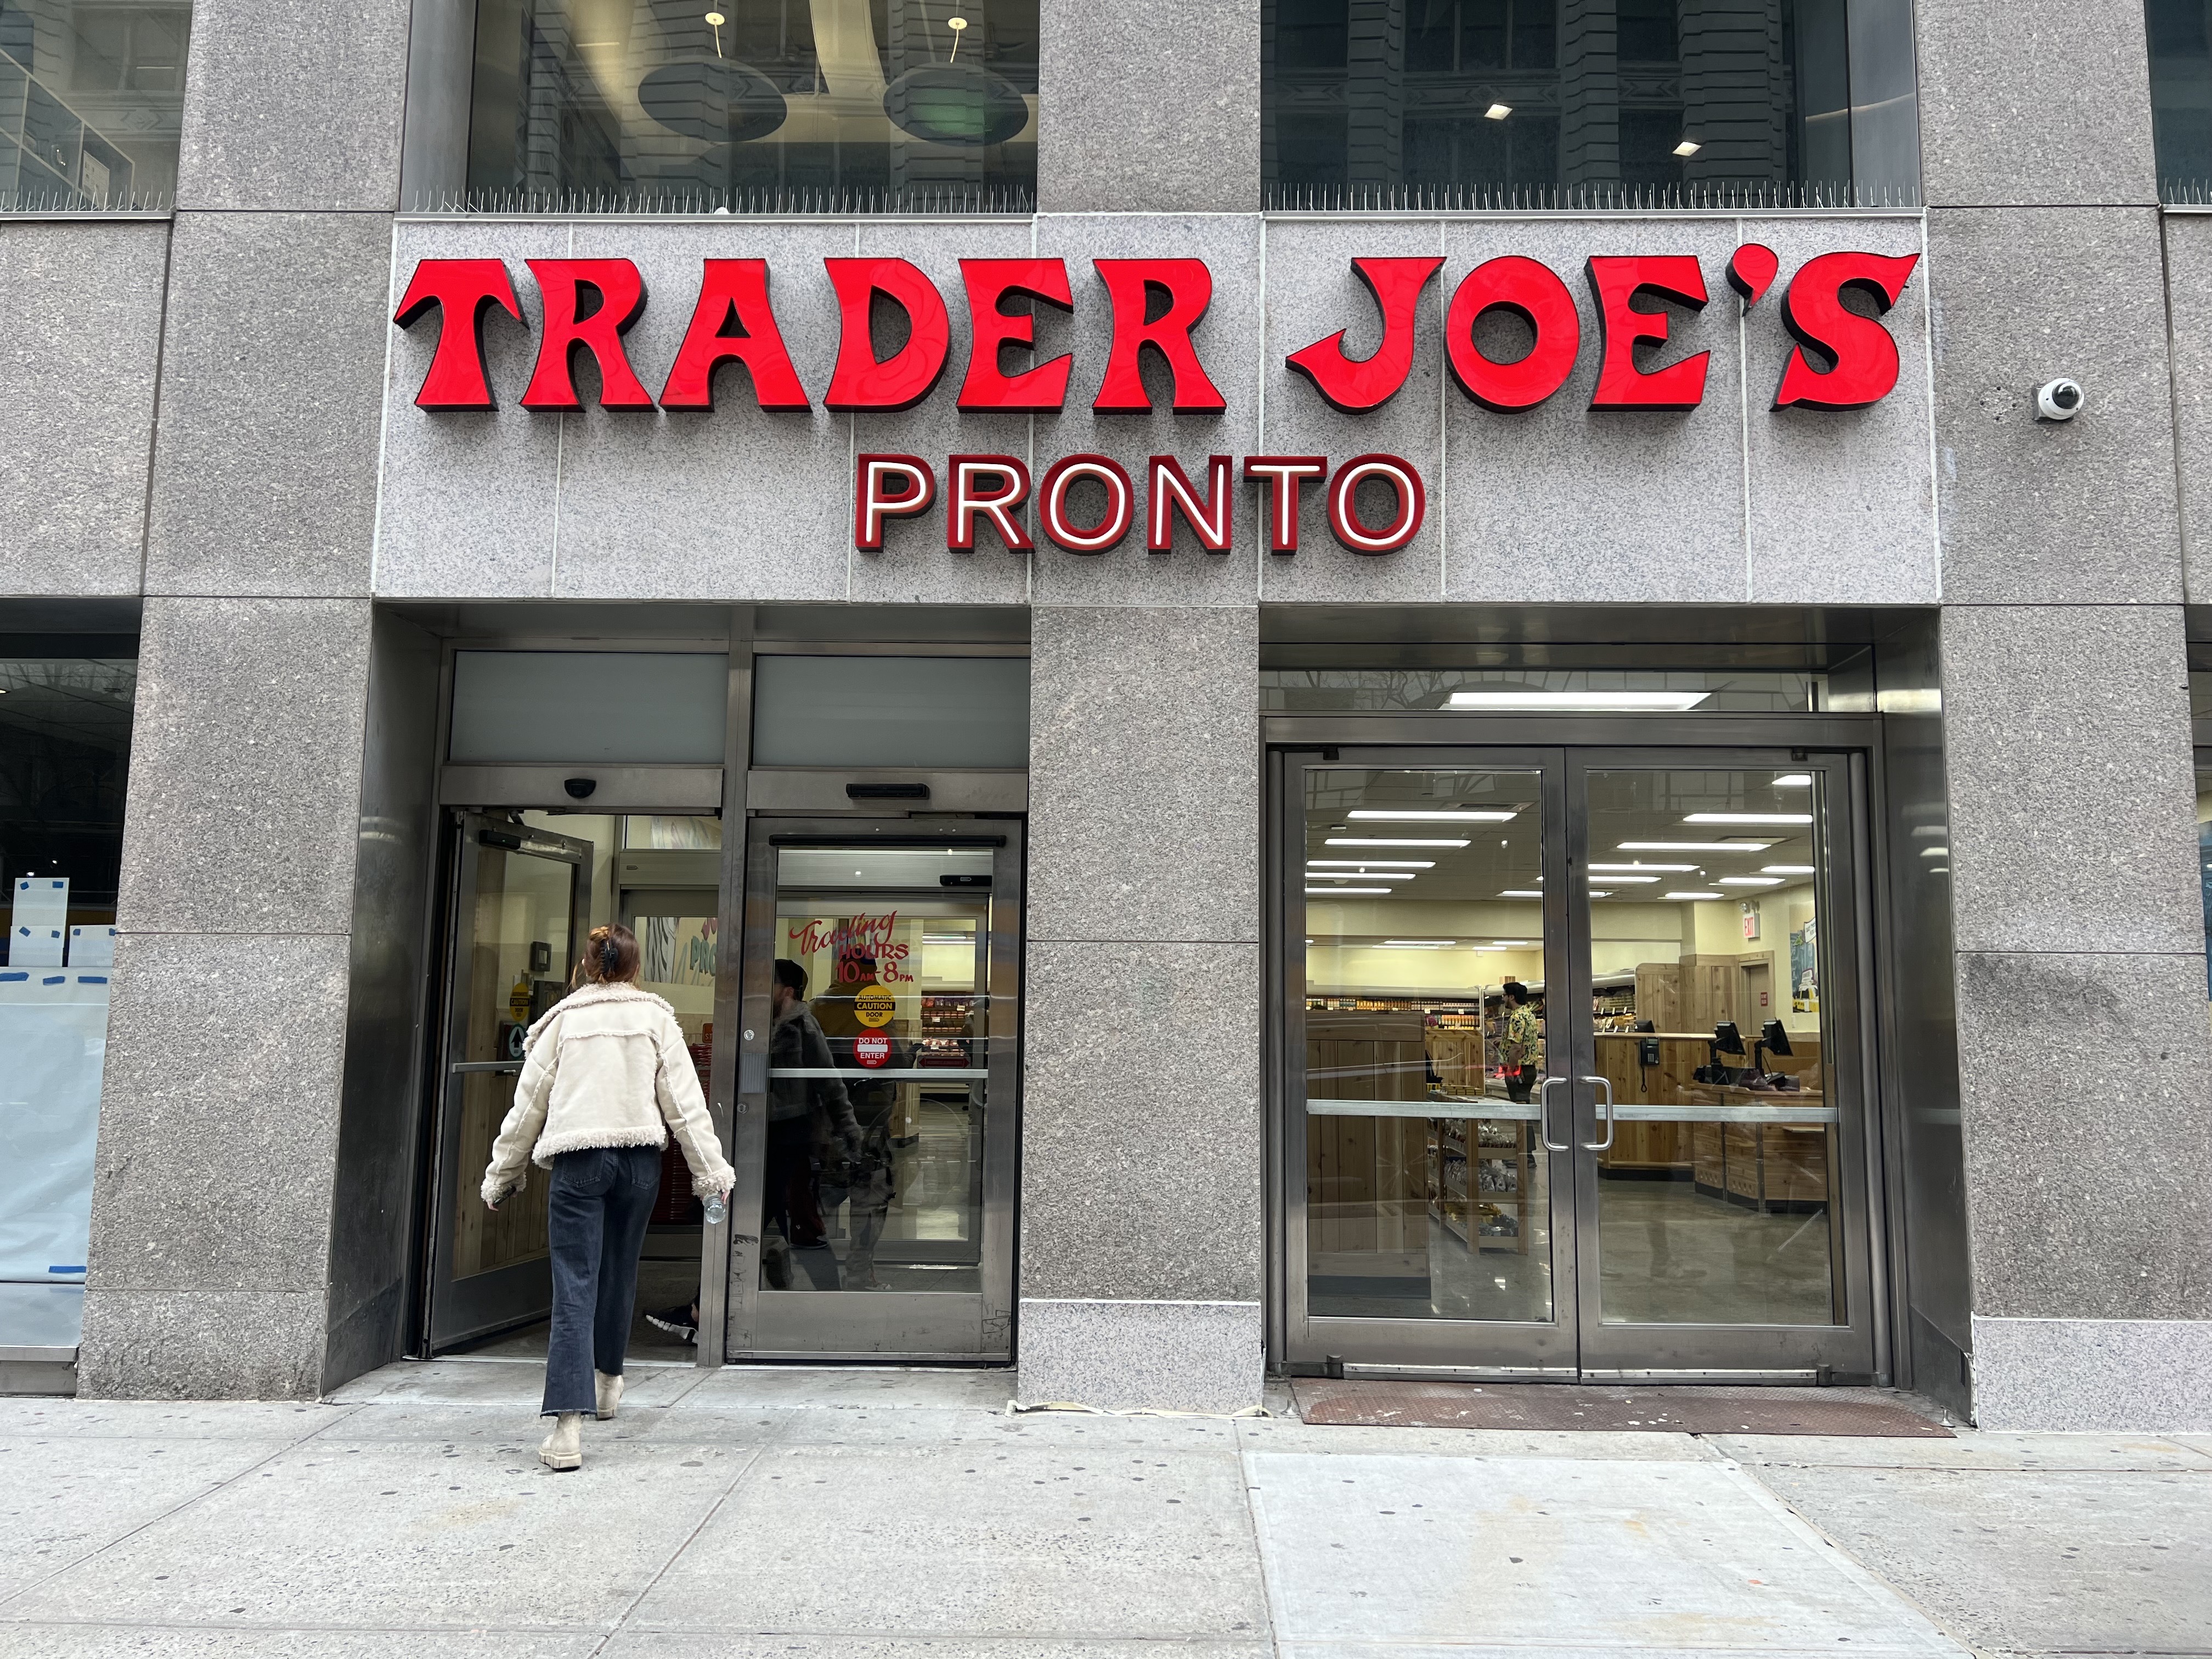 A new sign reads "Trader Joe's Pronto" in place of the former wine shop.